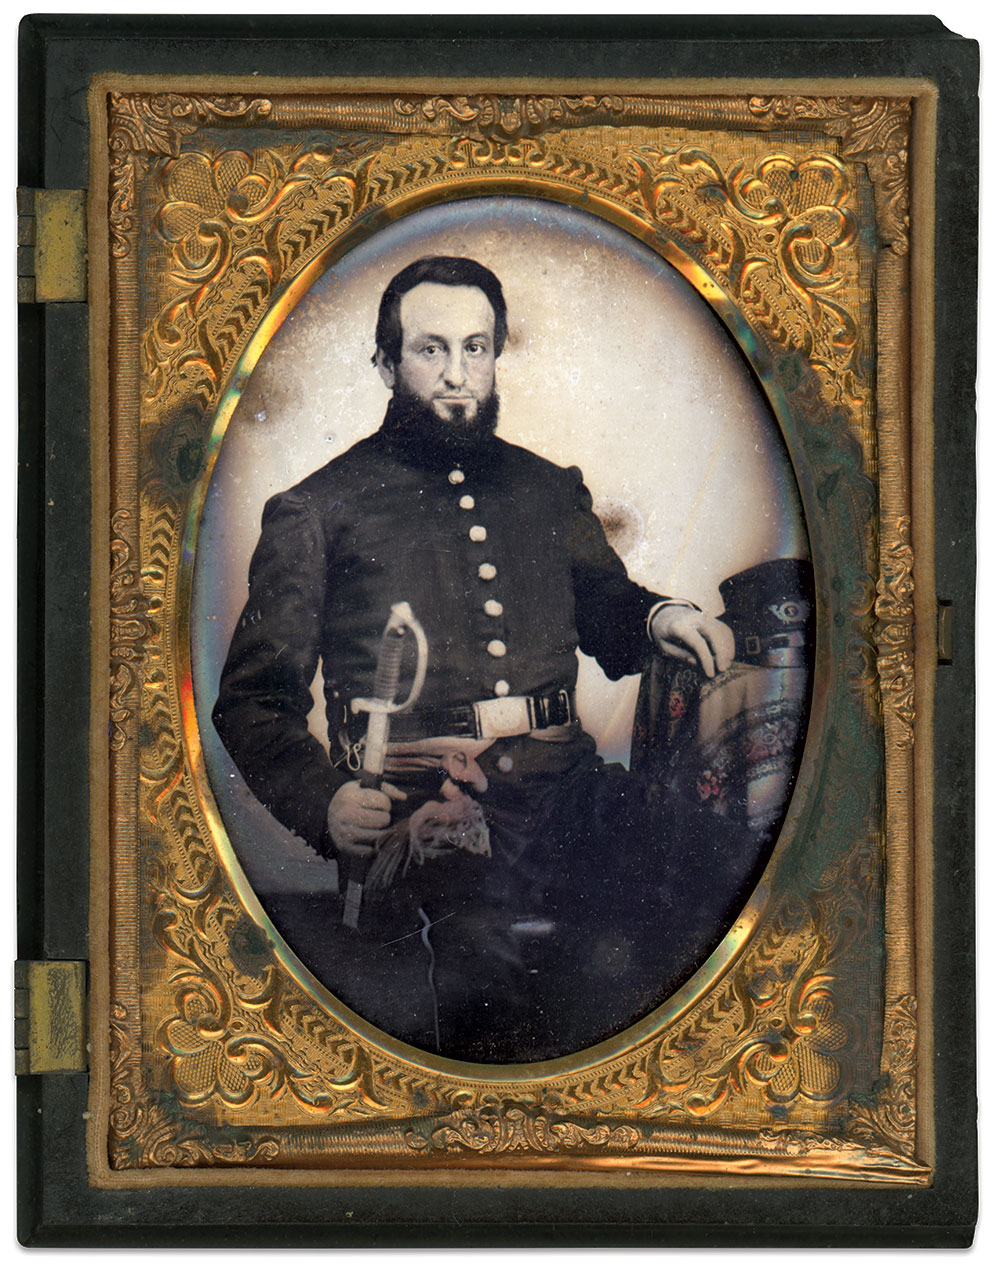 Captain Crabb. Sixth plate tintype by an unidentified photographer. Mike Rubino Collection.